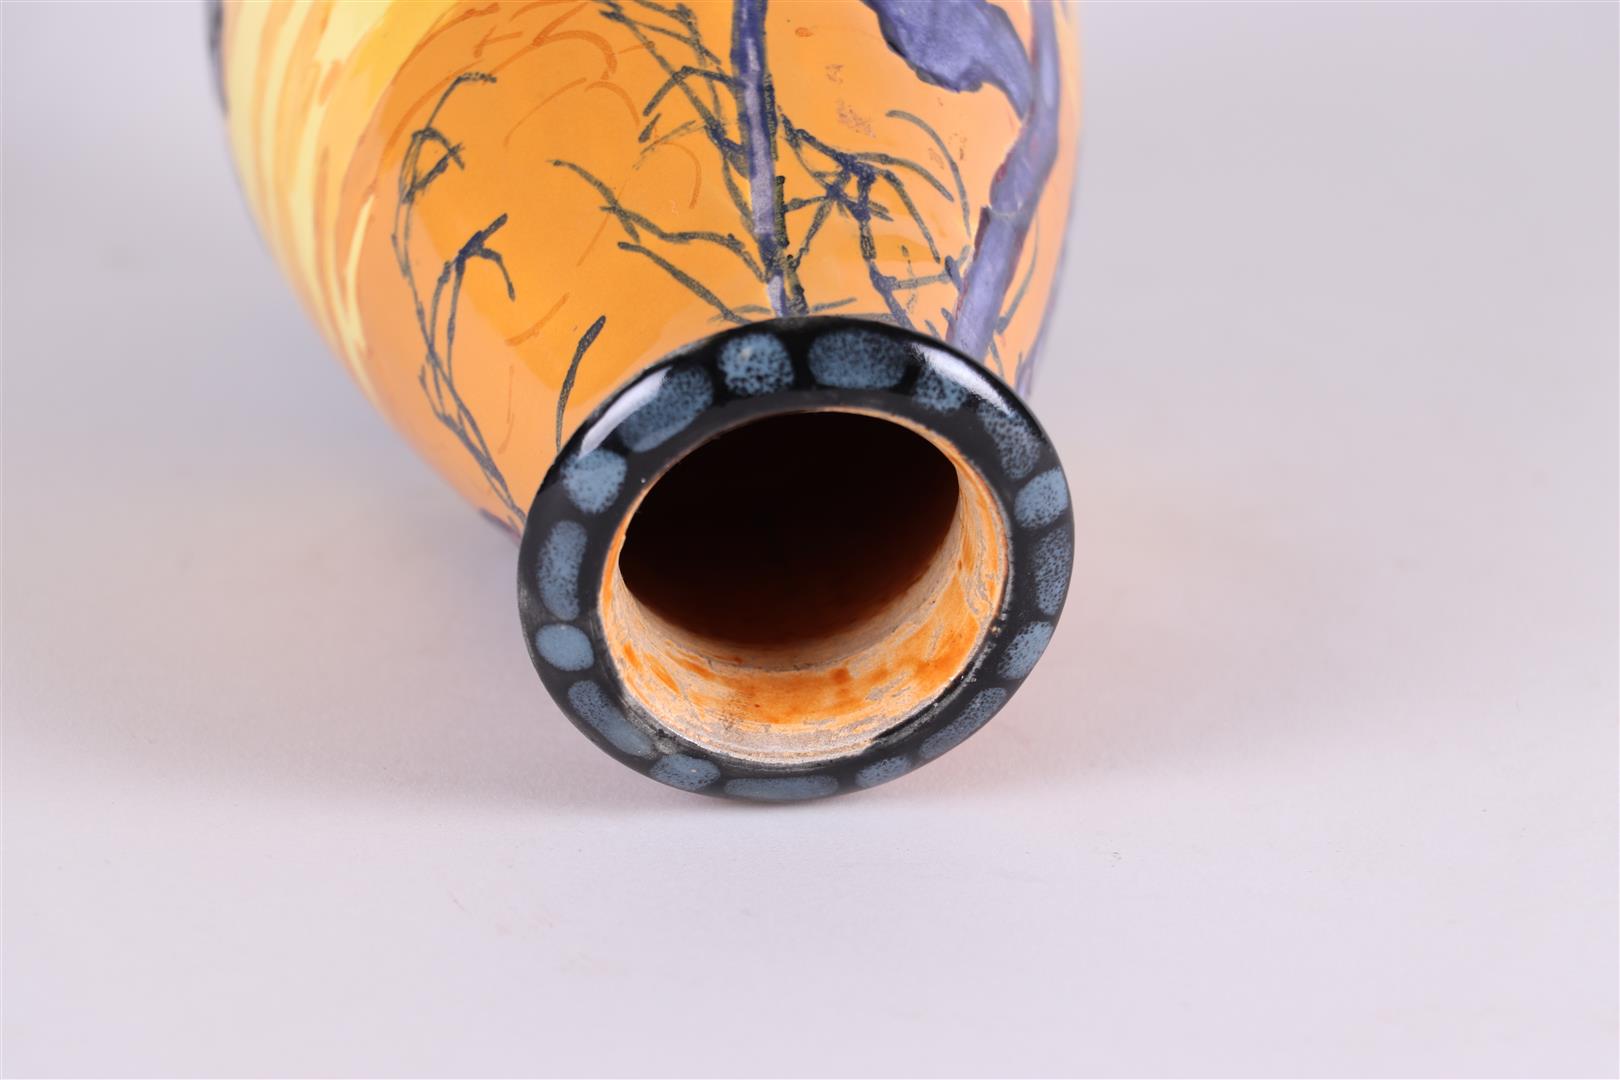 A Faience polychrome painted vase, marked Valluaris. France, early 20th century. - Image 5 of 6